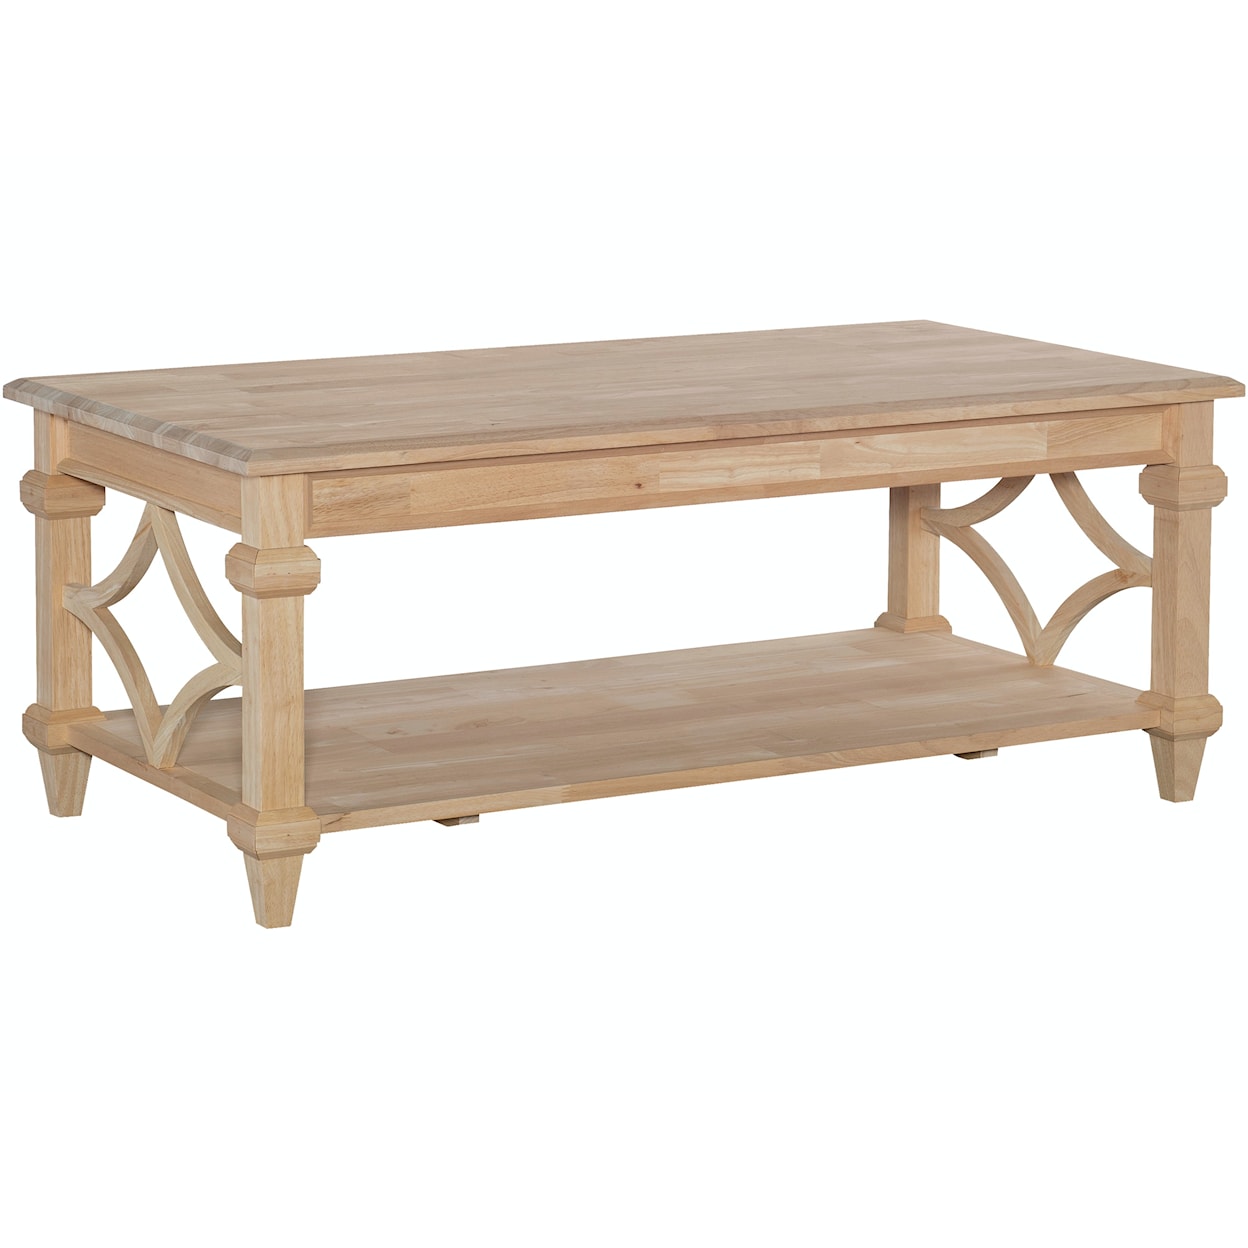 John Thomas SELECT Occasional & Accents Josephine Coffee Table